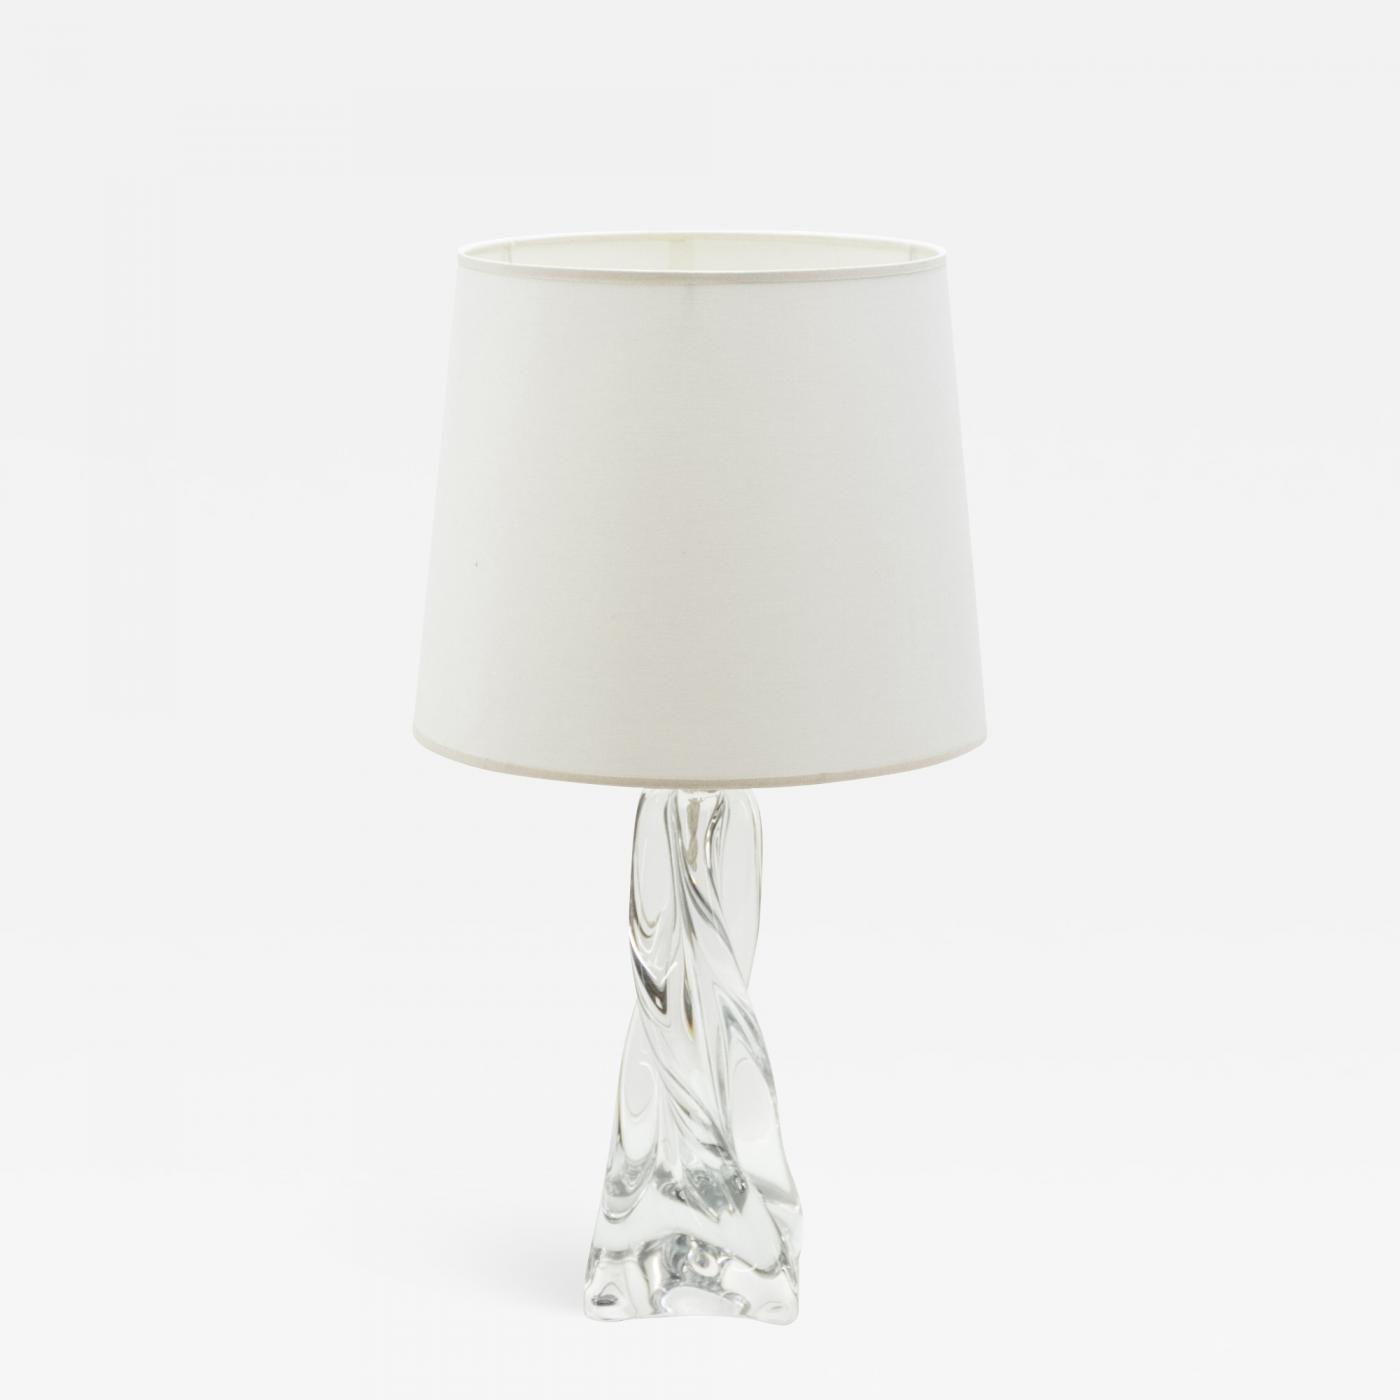 Jean Daum French Crystal Table Lamp 1960s, French Crystal Table Lamps